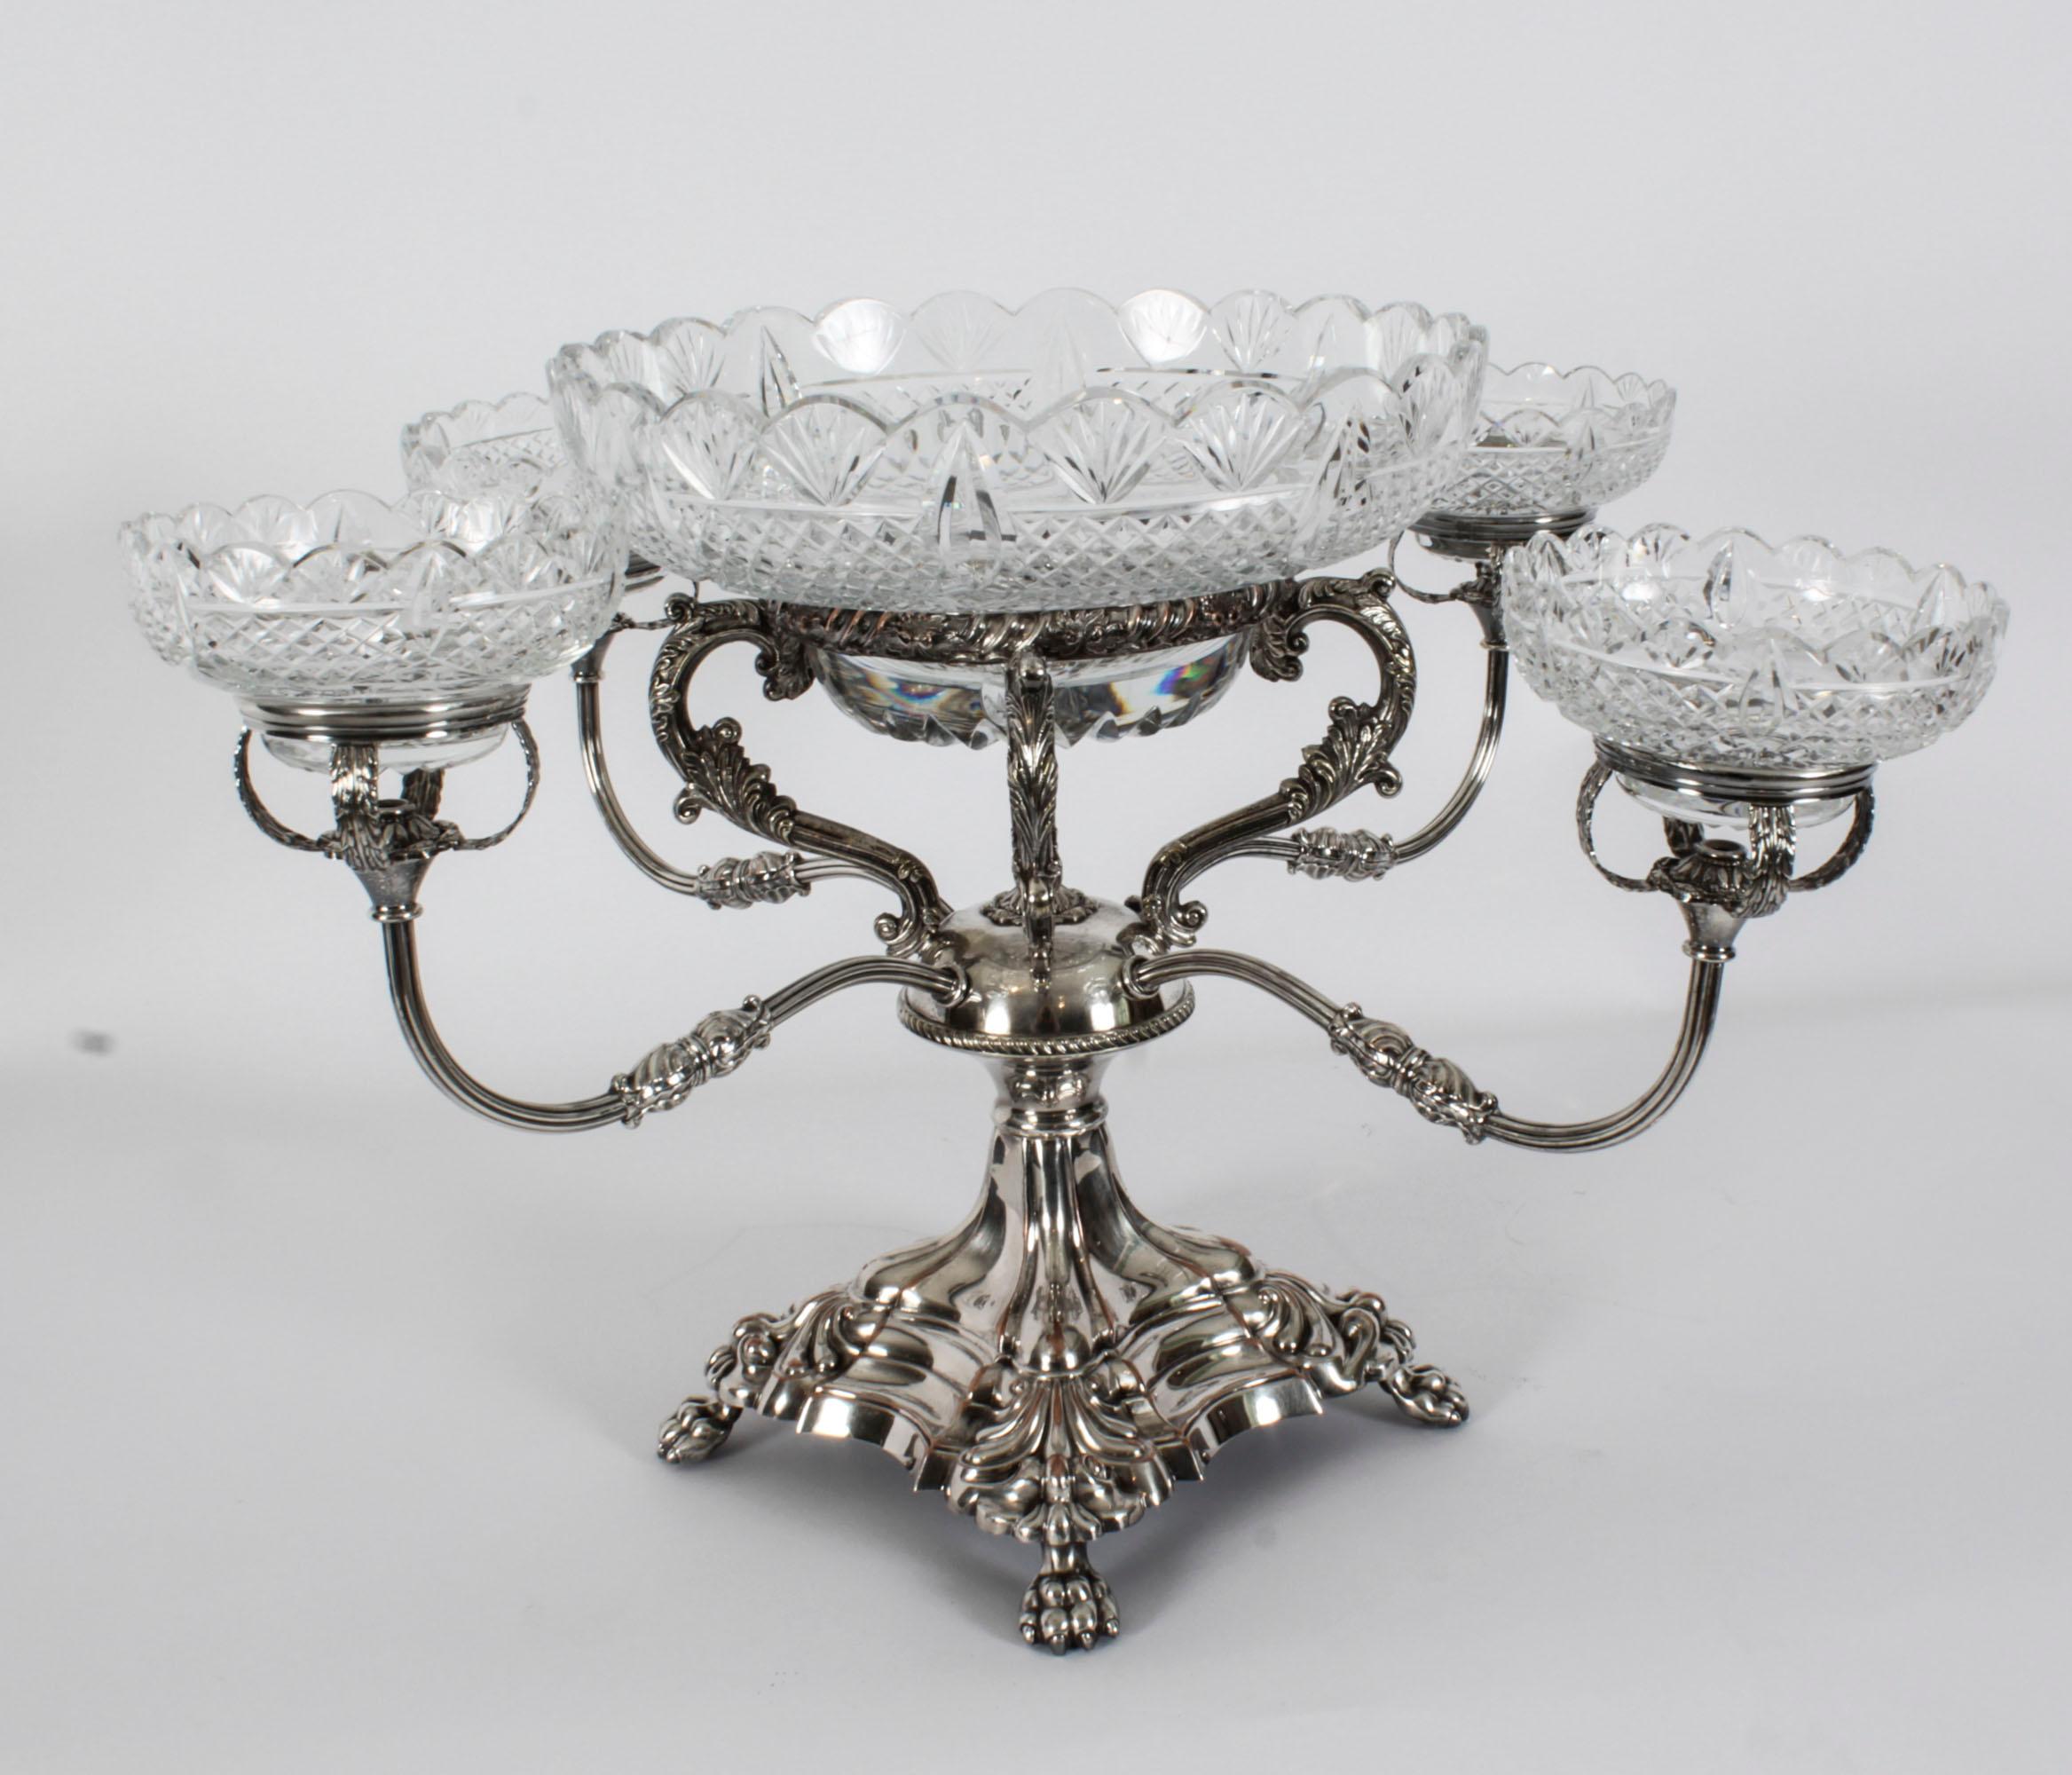 Antique English Silver Plate Cut Glass Epergne Candelabra Centrepiece 19th C 4